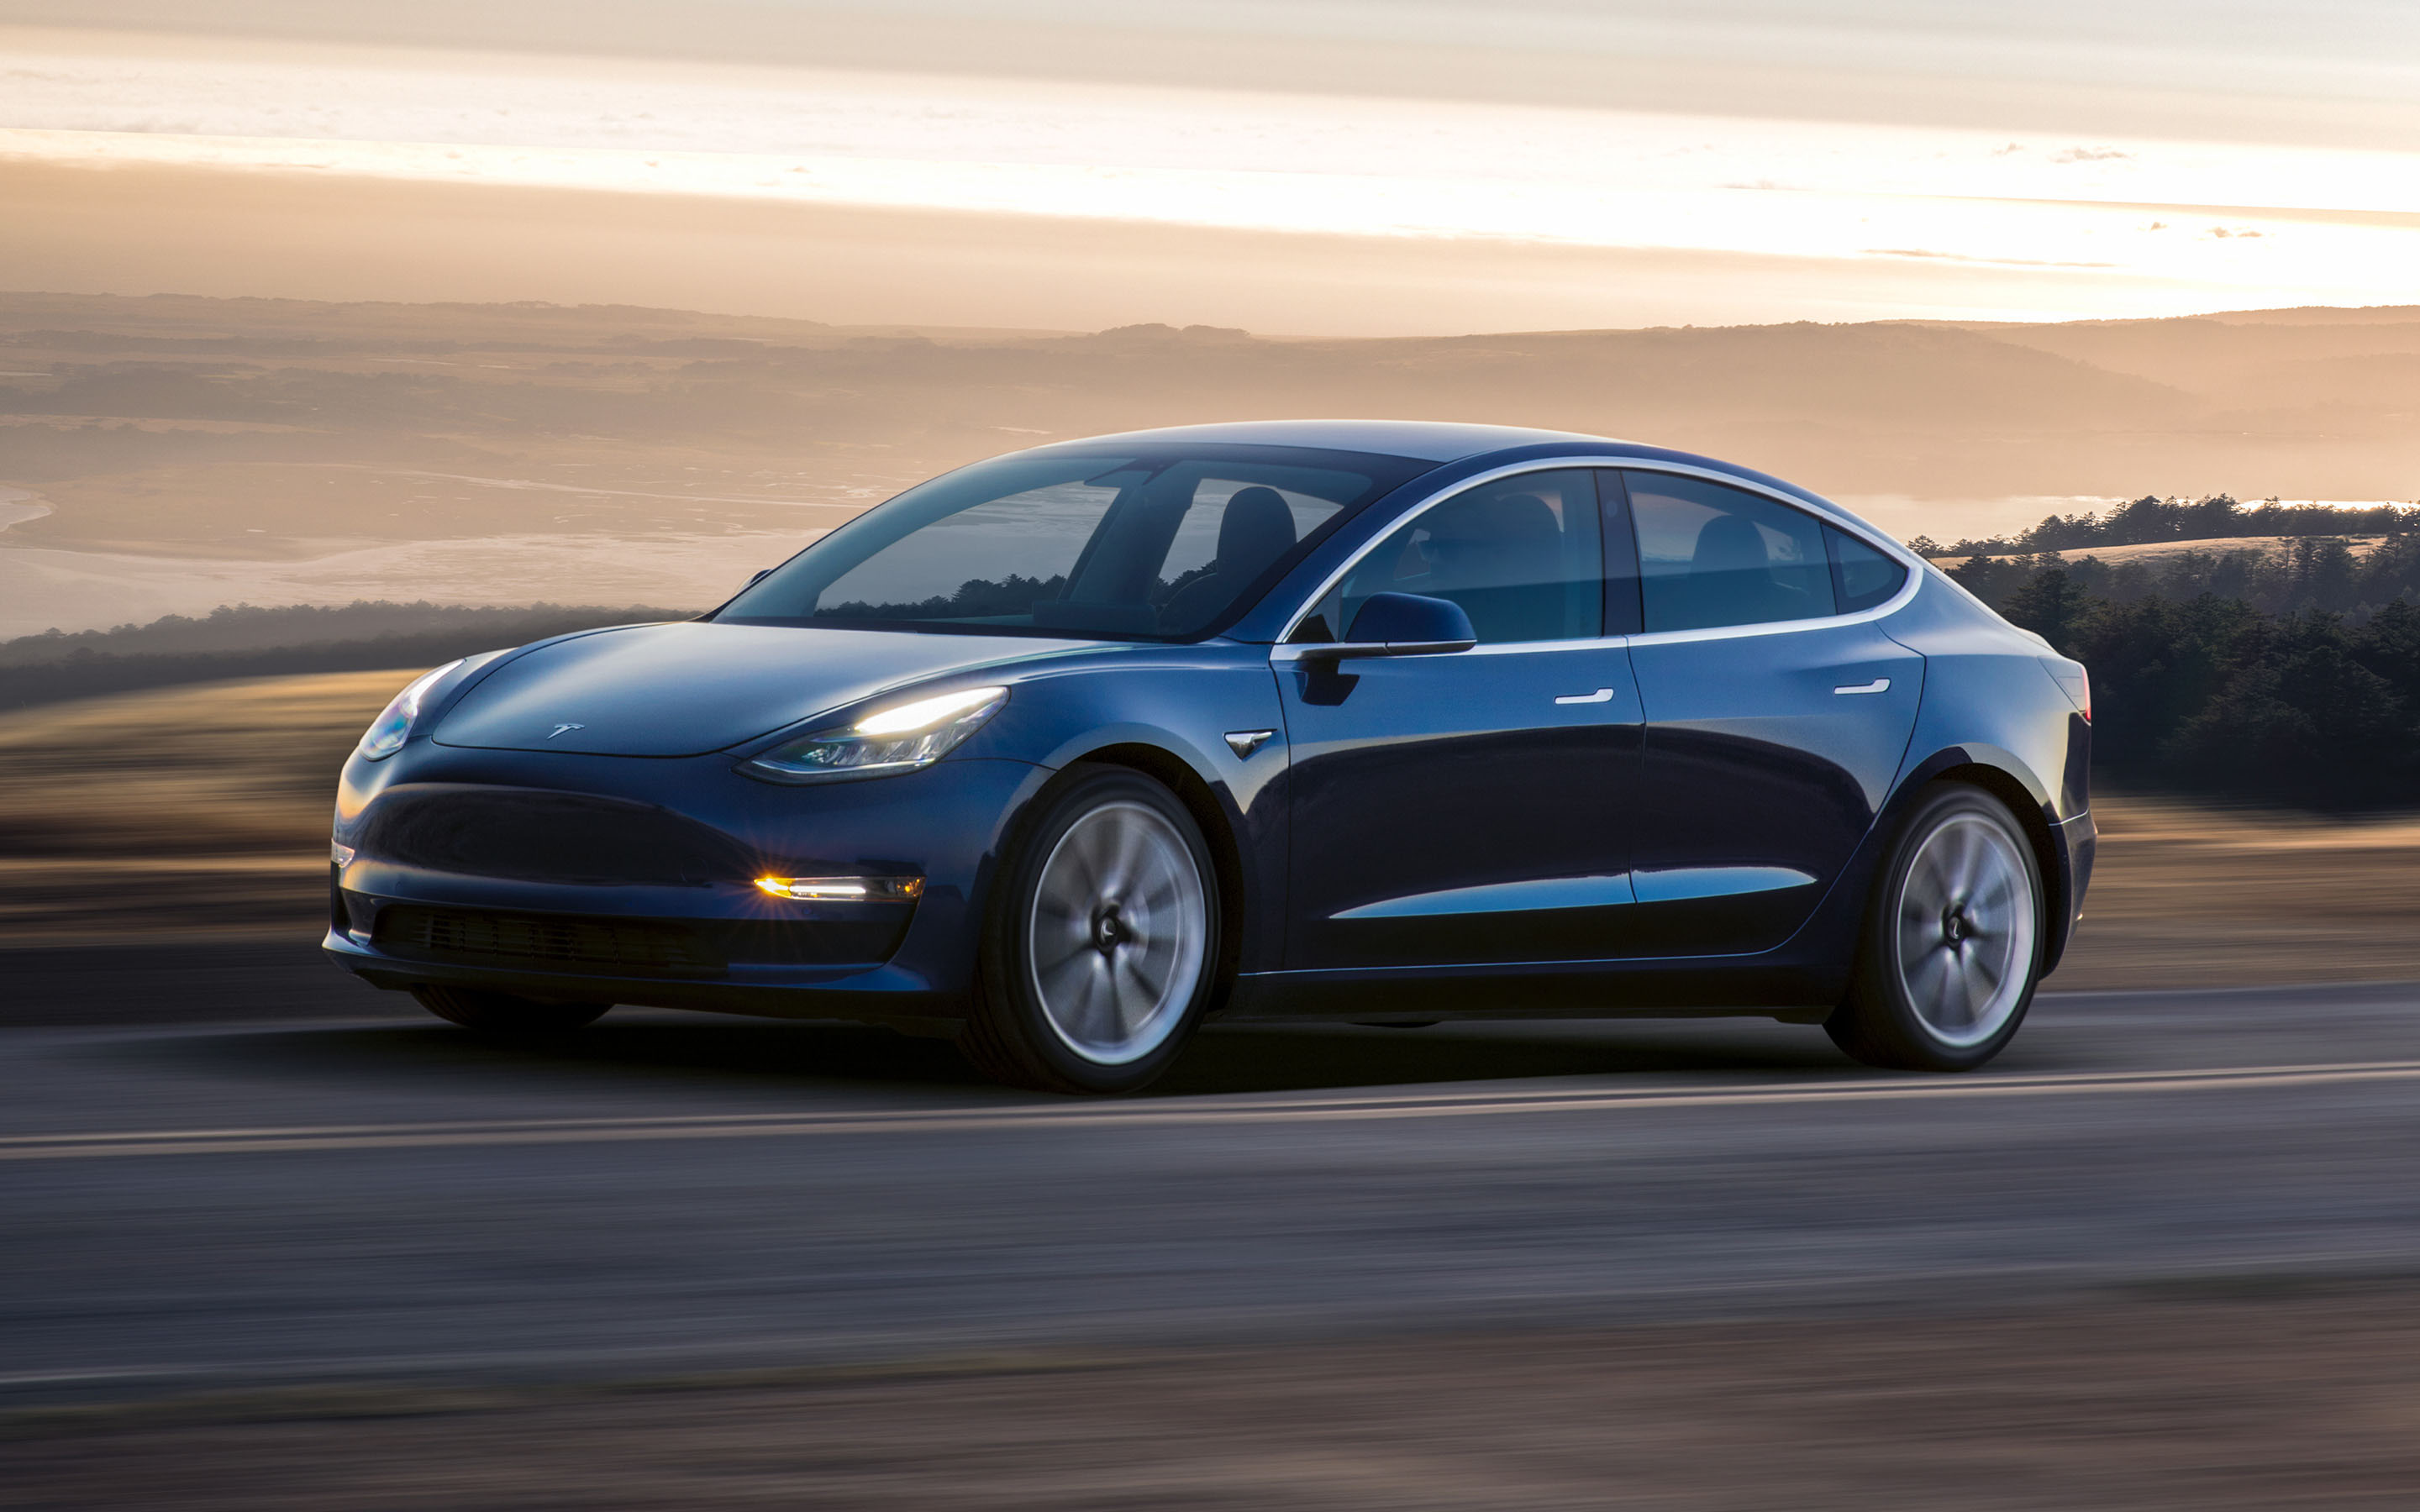 Tesla begins immediate deliveries of Model 3 as it aims for Q3 sales targets